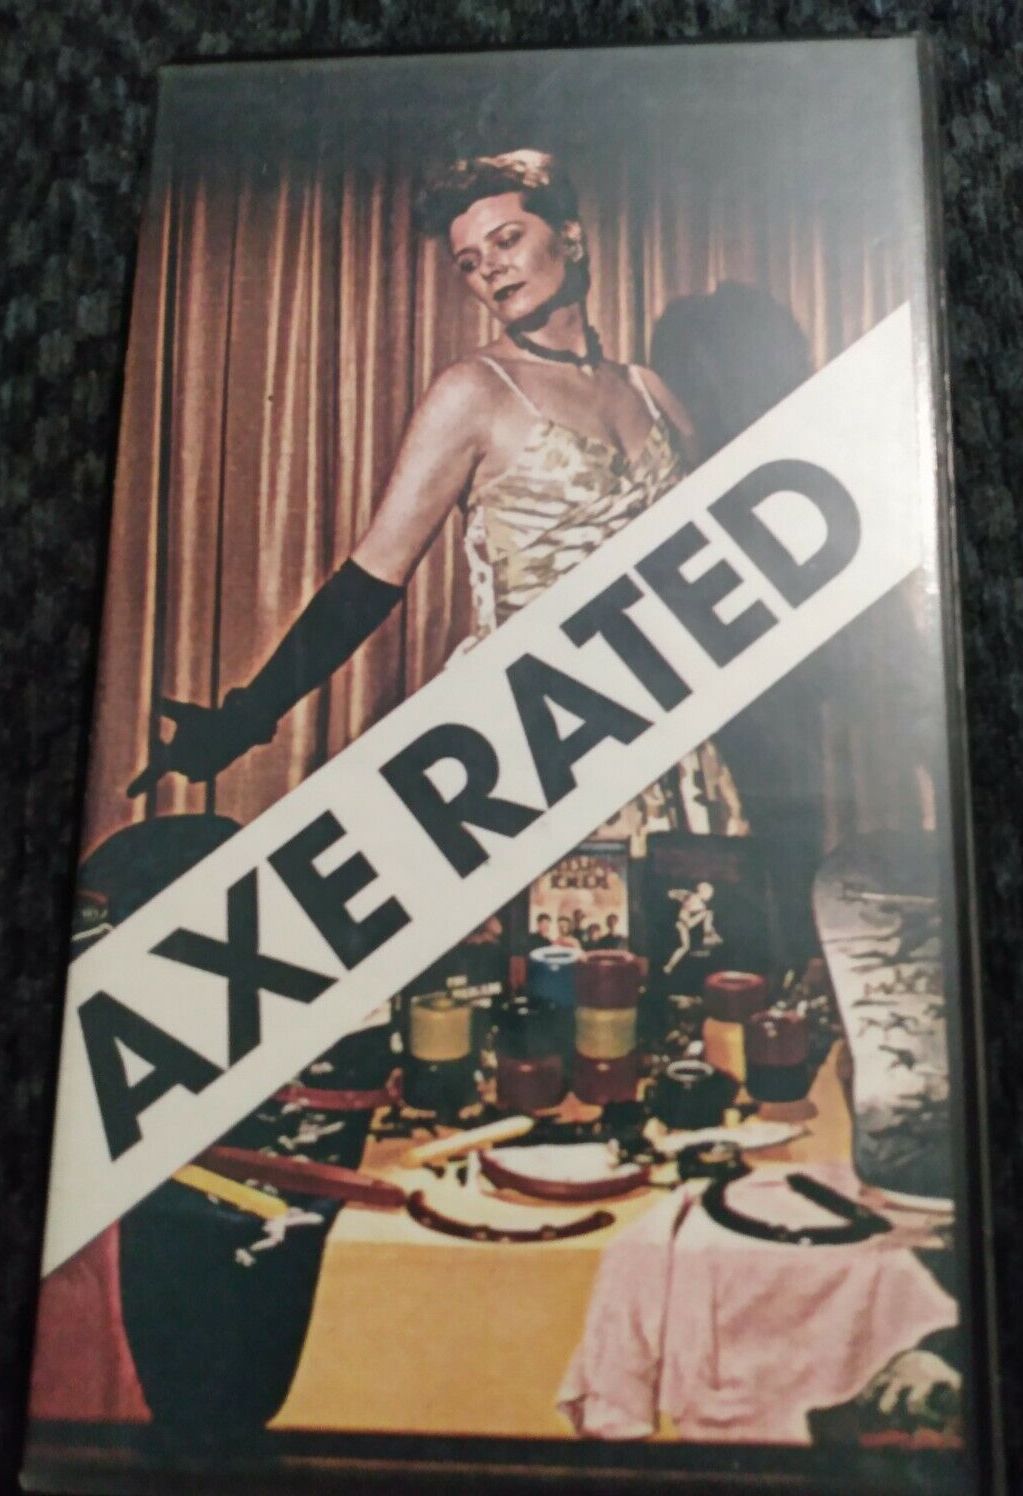 Powell Peralta - Axe Rated cover